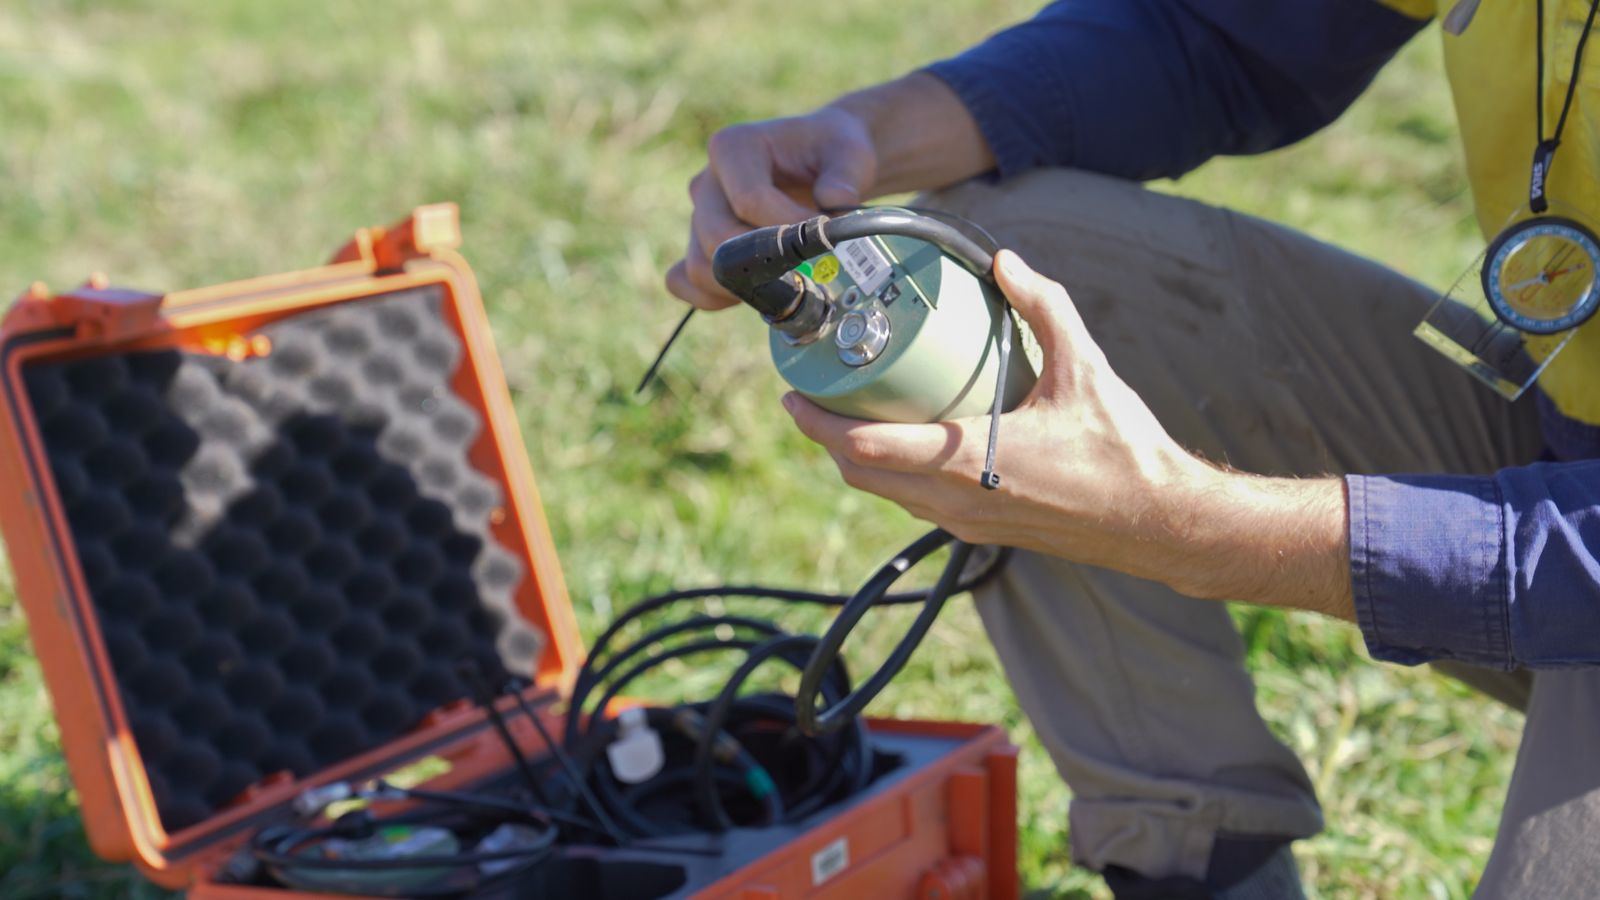 A technician crouches over a storage box in a grassy field, preparing a seismic sensor for insertion.